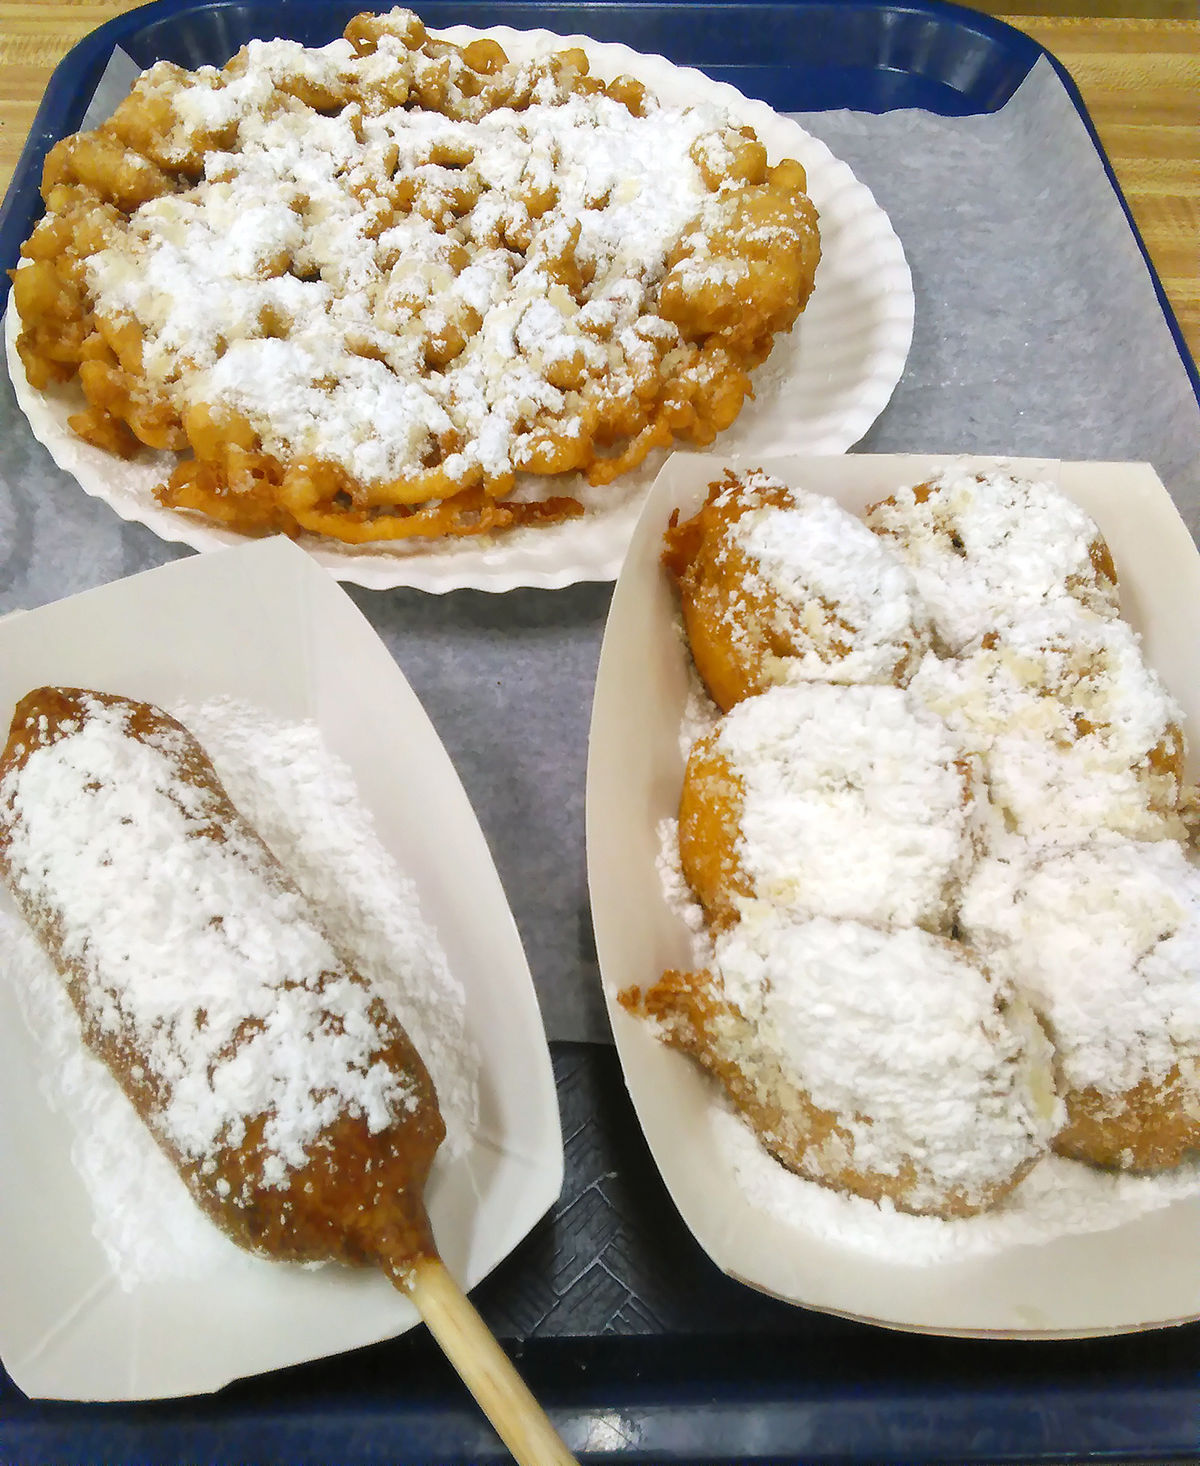 My Fried Oreos and Rita's Funnel Cake | Joy of Living | Flickr